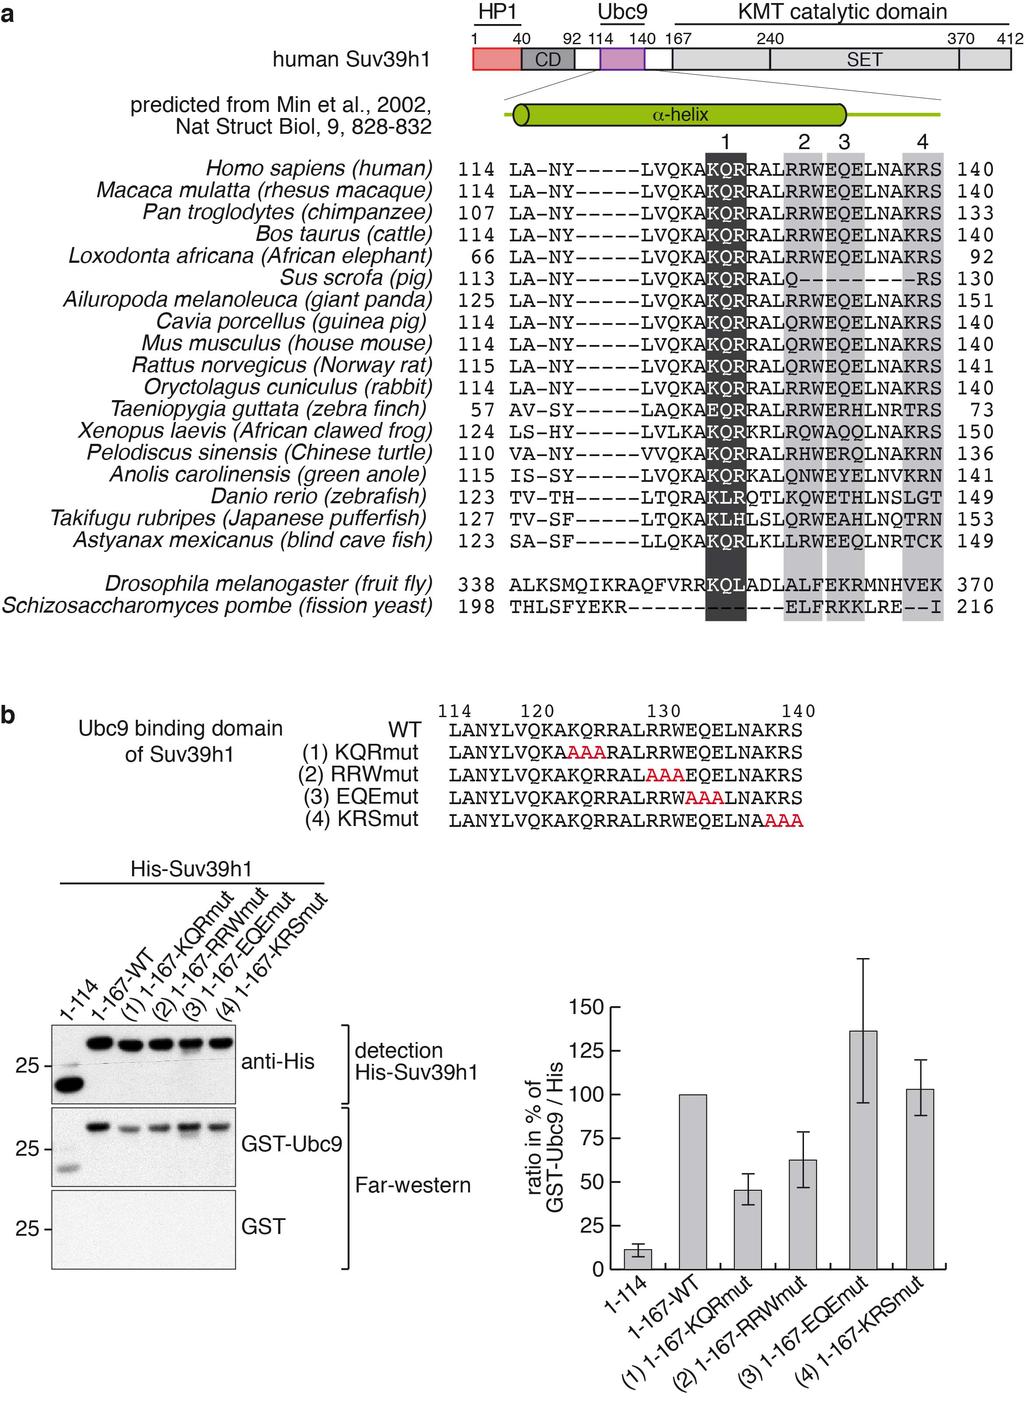 Supplementary Figure 12. The Ubc9 binding domain of Suv39h1. a. Phylogenetic comparison of Suv39h1 in the Ubc9 binding domain. This domain in human Suv39h1 corresponds to aa114-140 (Supplementary Fig.